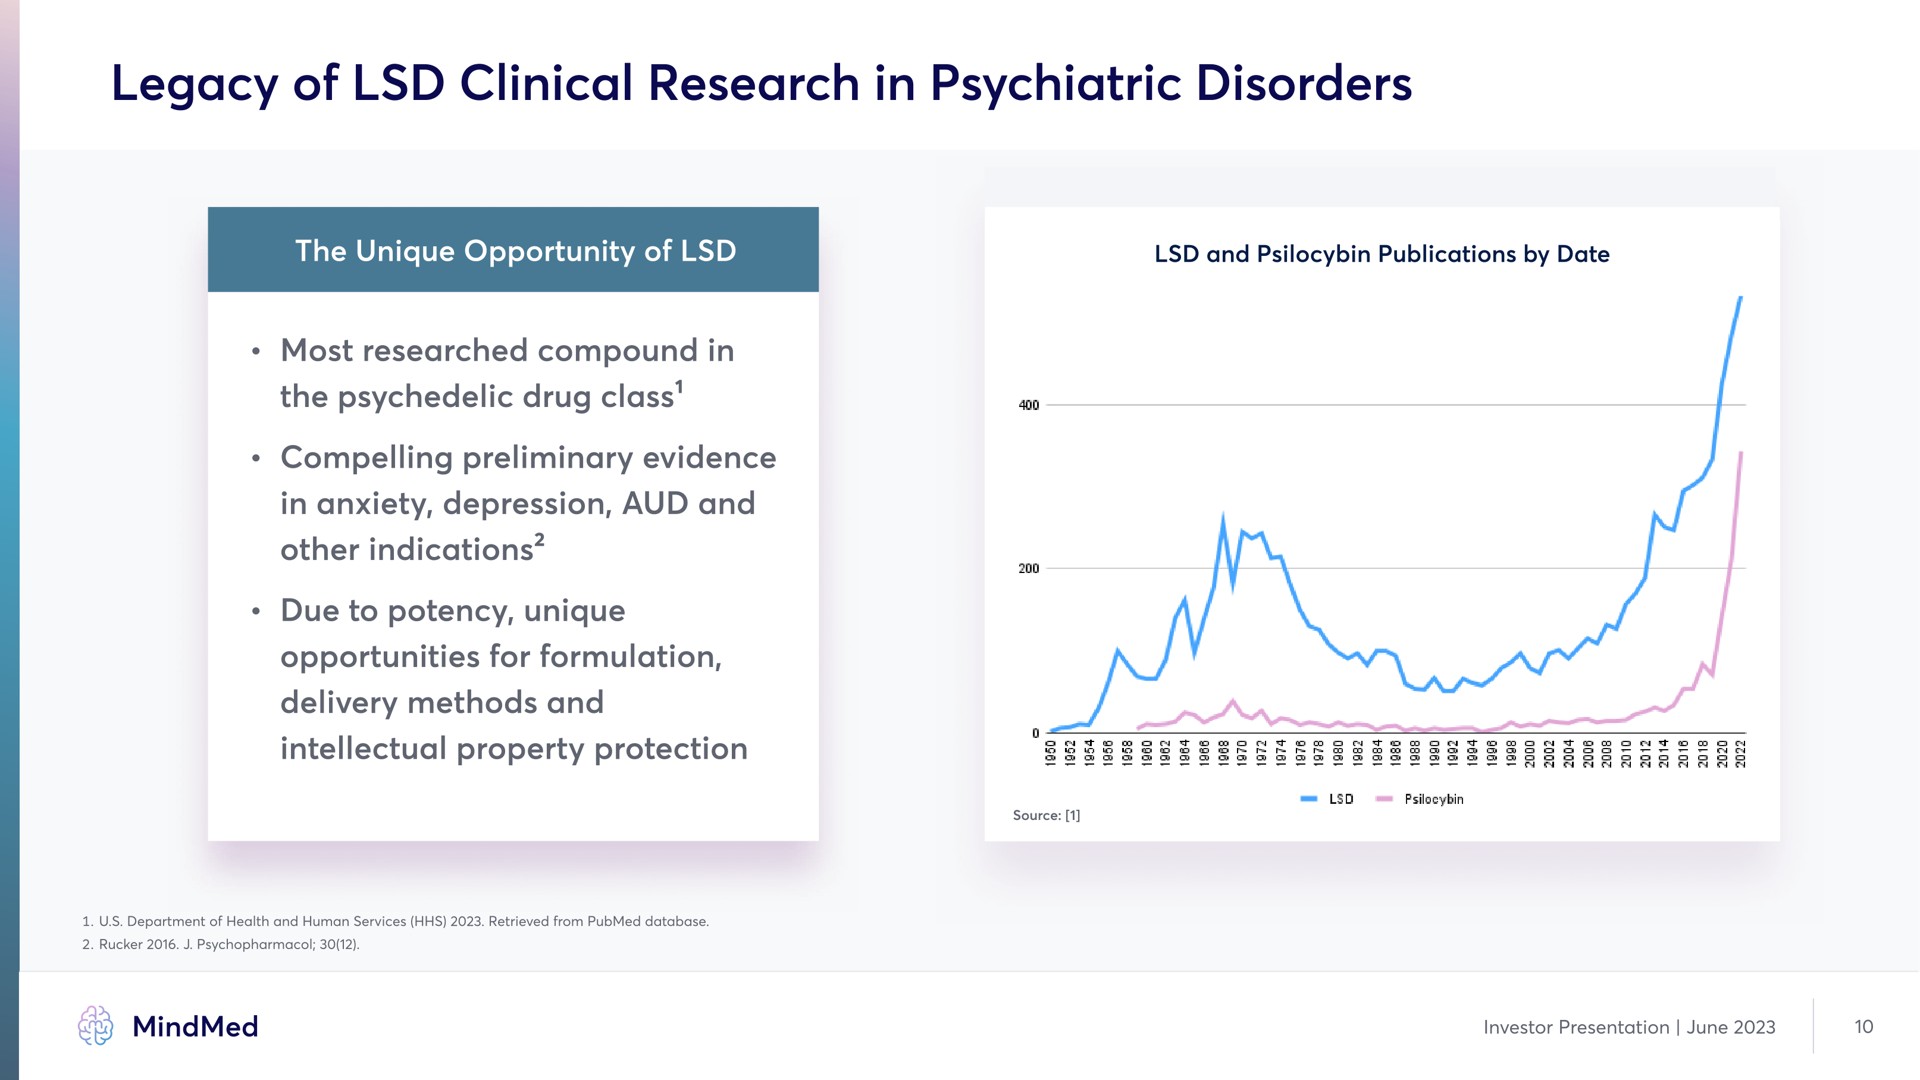 legacy of clinical research in psychiatric disorders | MindMed